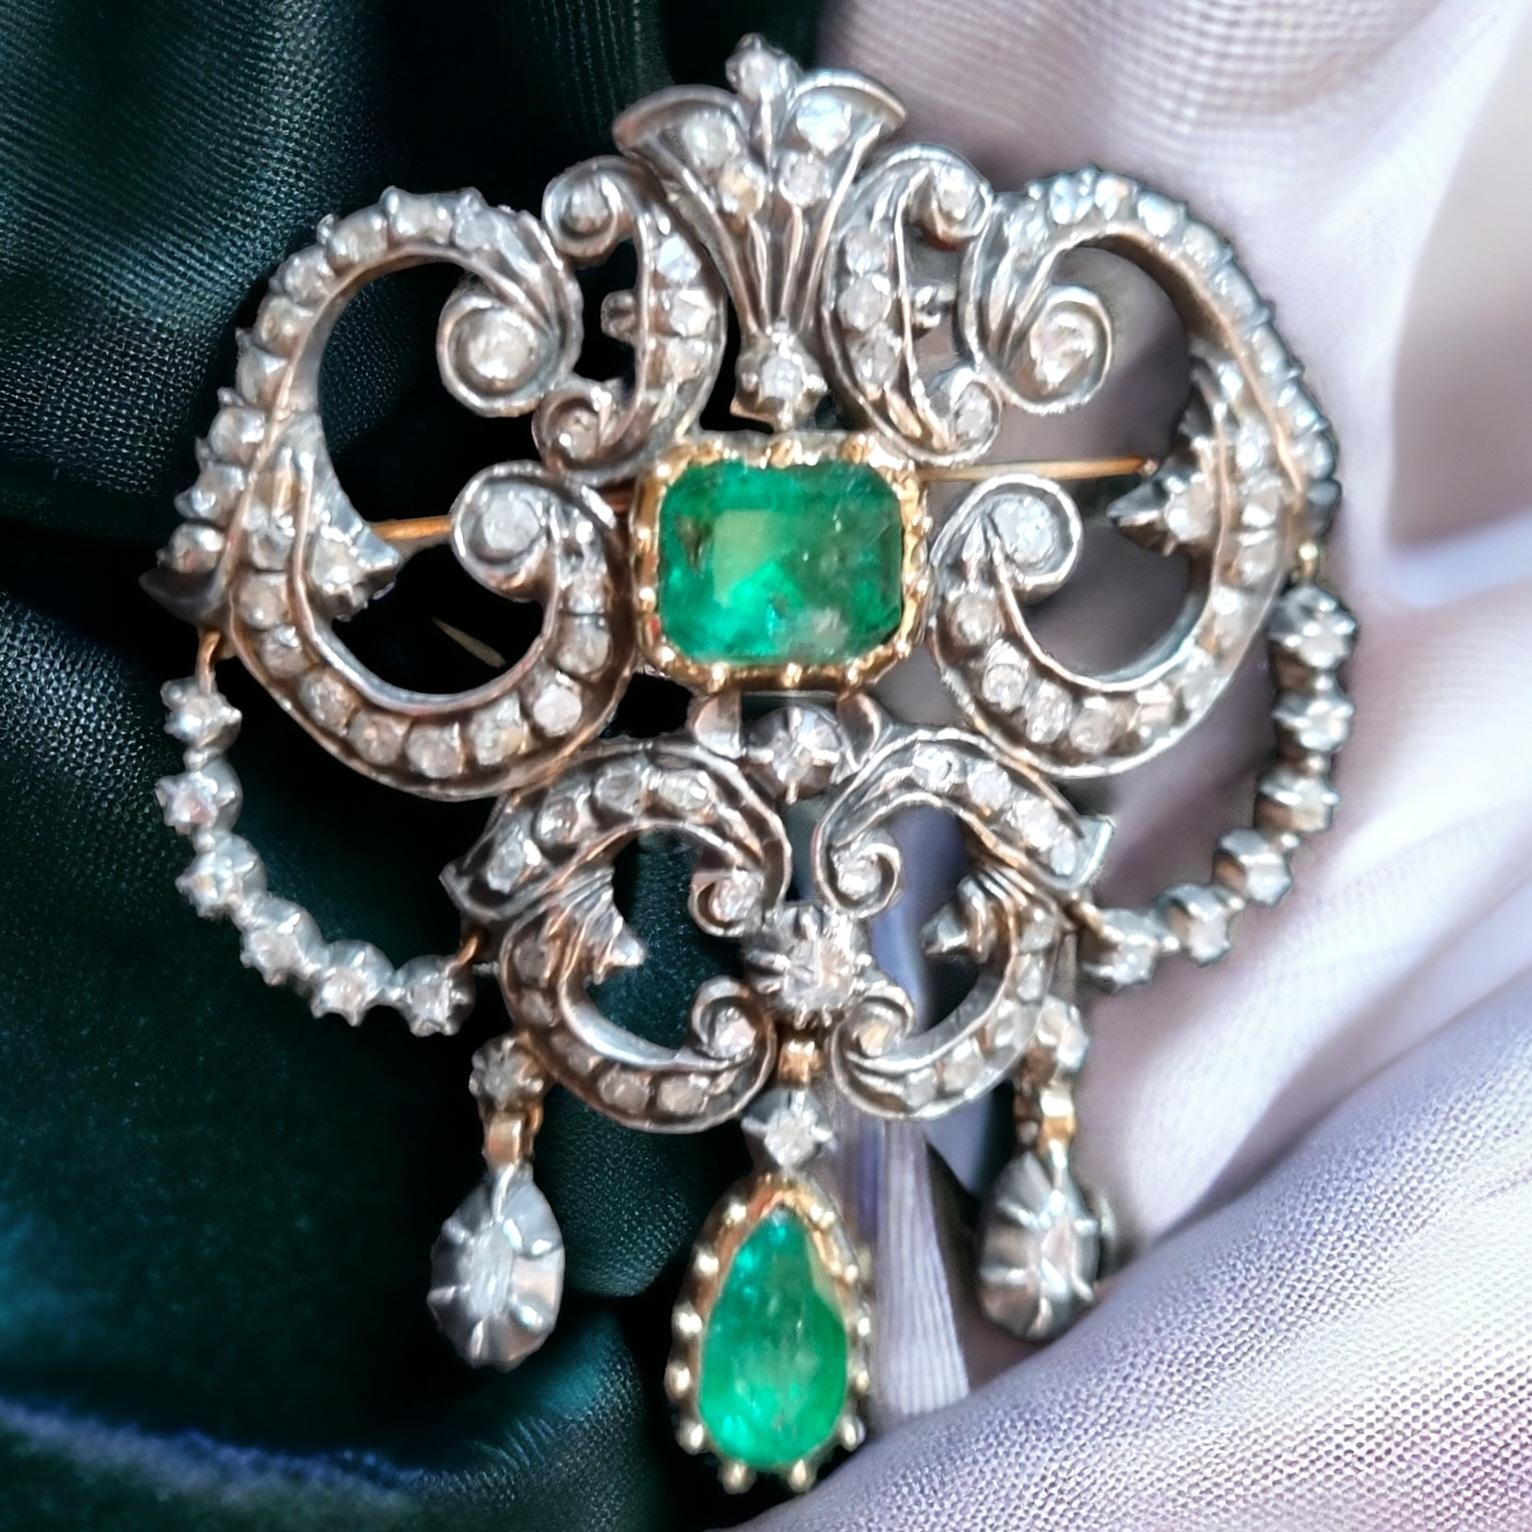 BAROQUE IBERIAN (SPAIN) EMERALD AND DIAMOND PENDANT/BROOCH 18Th Century.
A radiant, ravishing, and regal Baroque (Georgian/Iberian Spain) pendant/brooch XVIII Century. Finely handcrafted in darkened silver over 18K yellow gold. Displays 2 exquisite